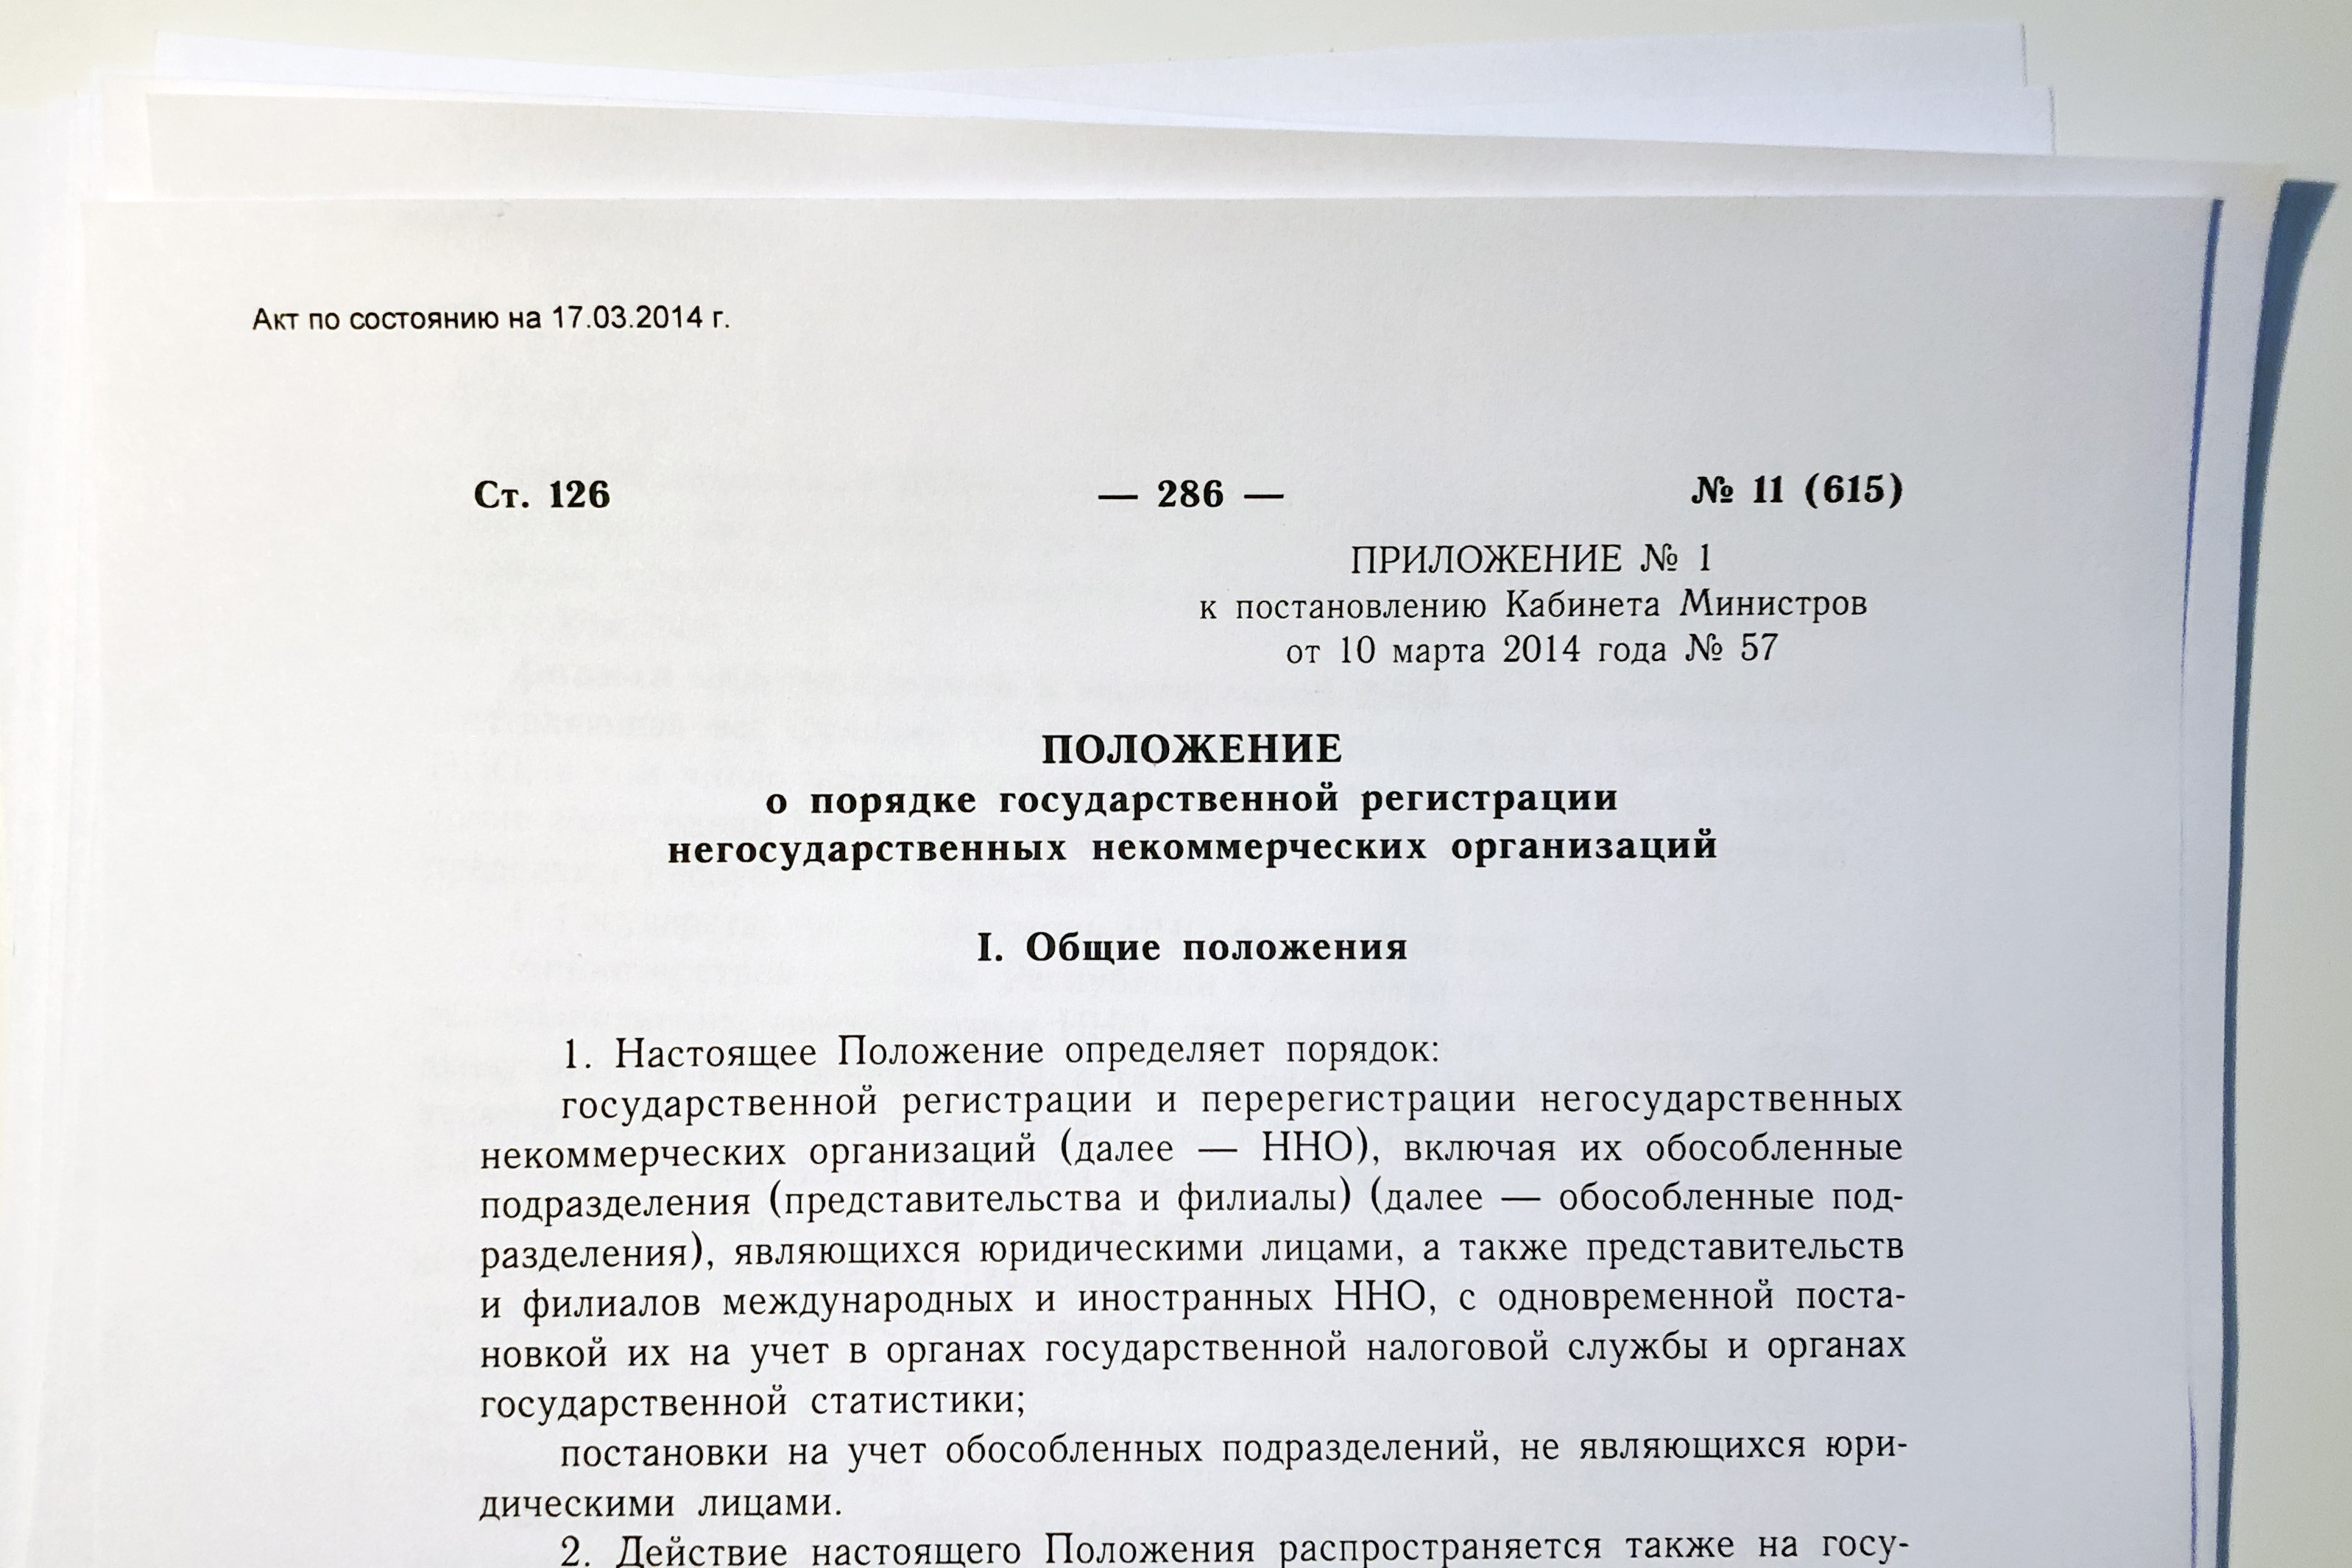 The 2014 Cabinet of Ministers Decree on the procedure for state registration of nongovernmental non-profit organizations.